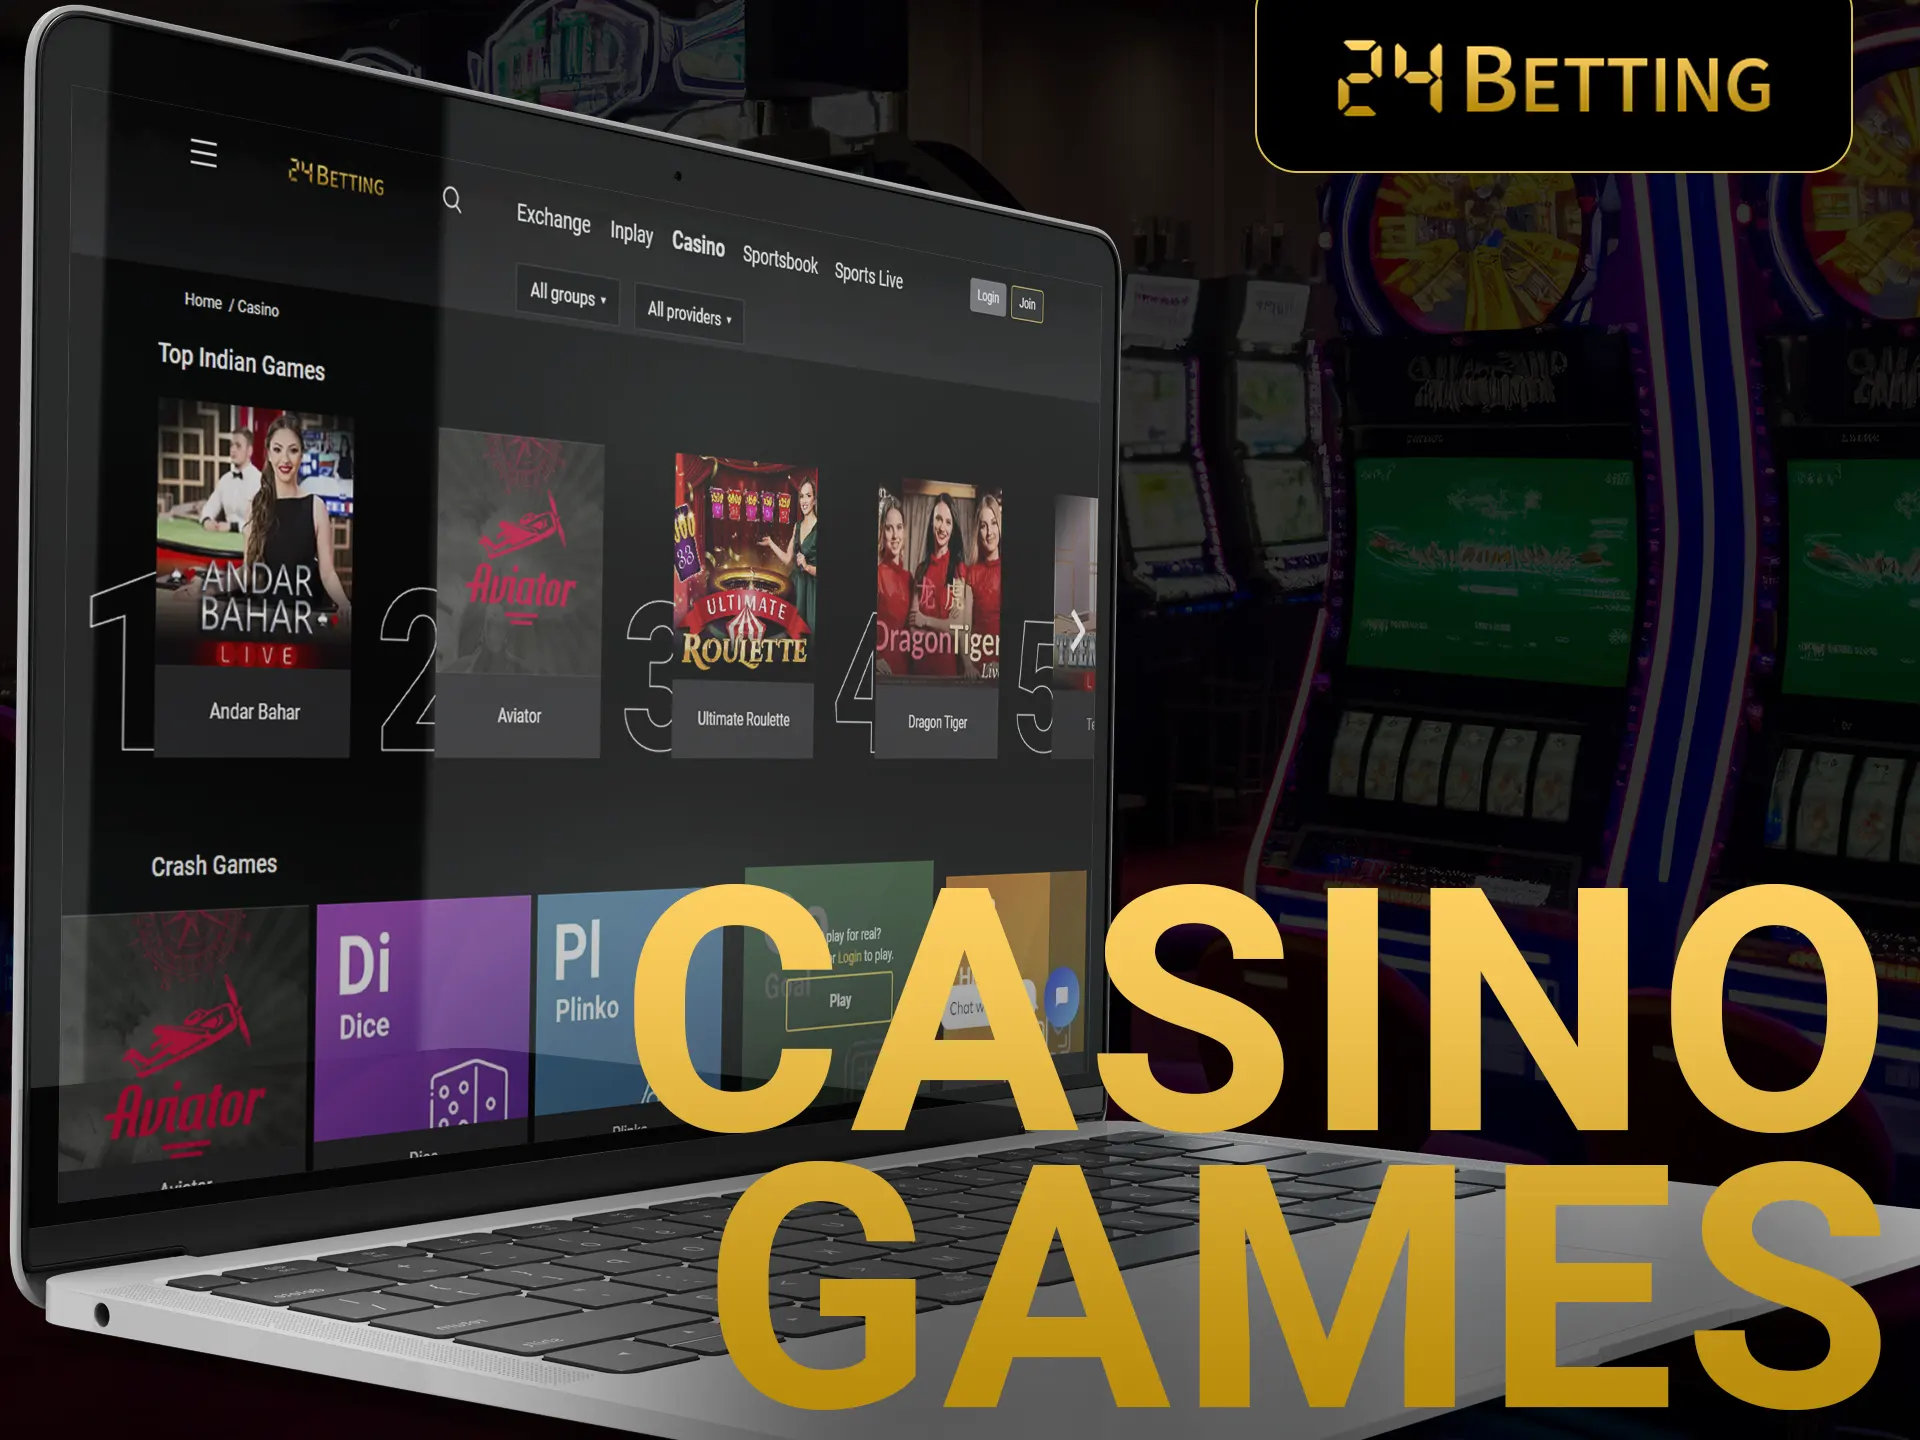 On 24betting, there are many casino games to play.